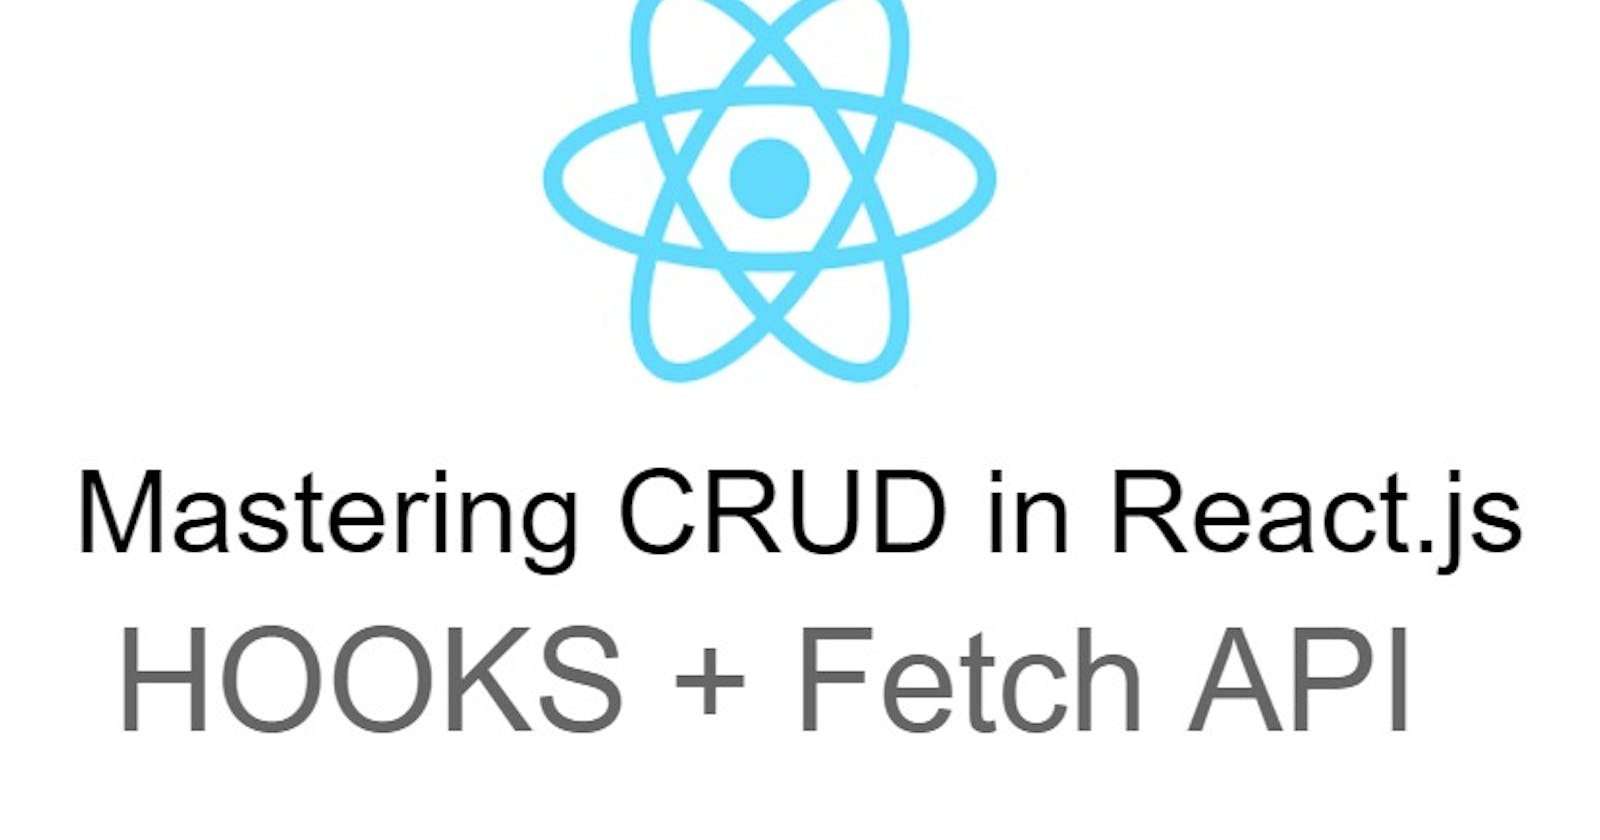 Handling CRUD Operations with React Hooks and Fetch API: A Hands-On Lab